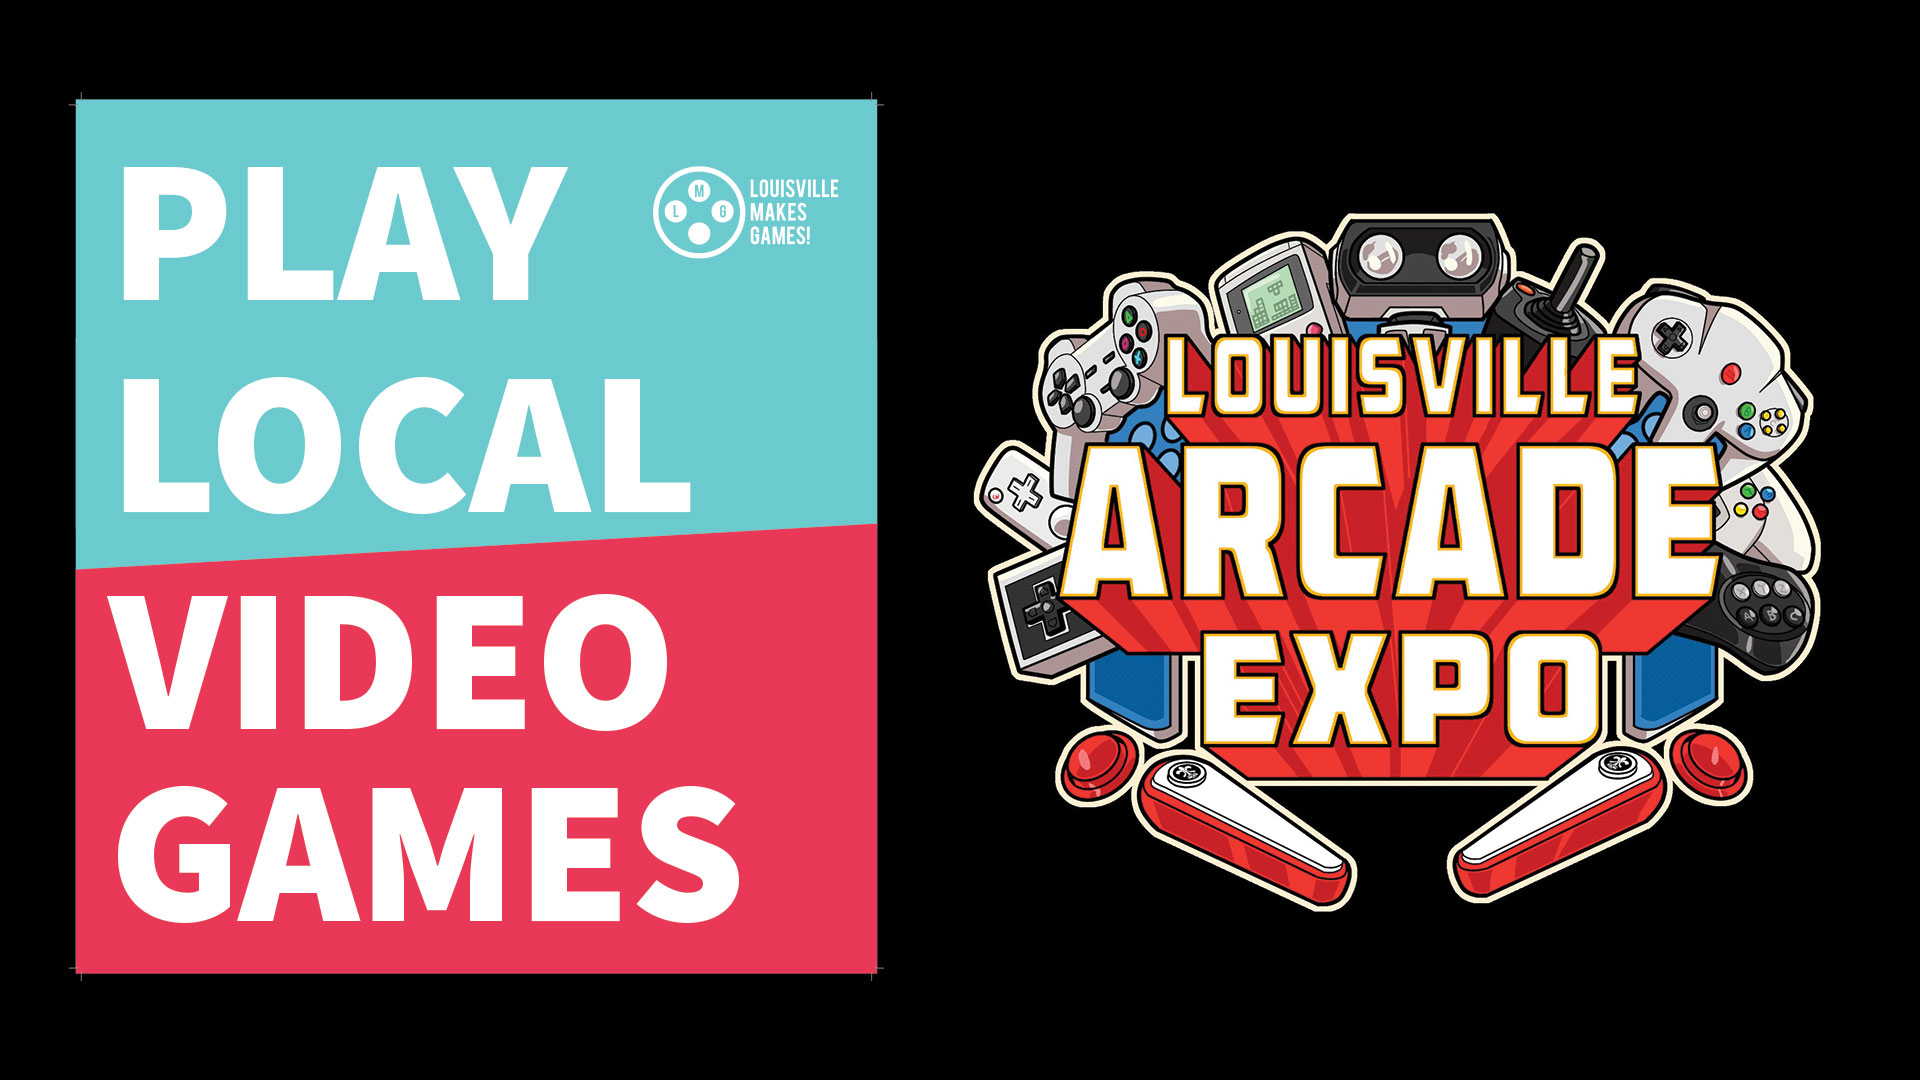 Locally Made Games at Louisville Arcade Expo!